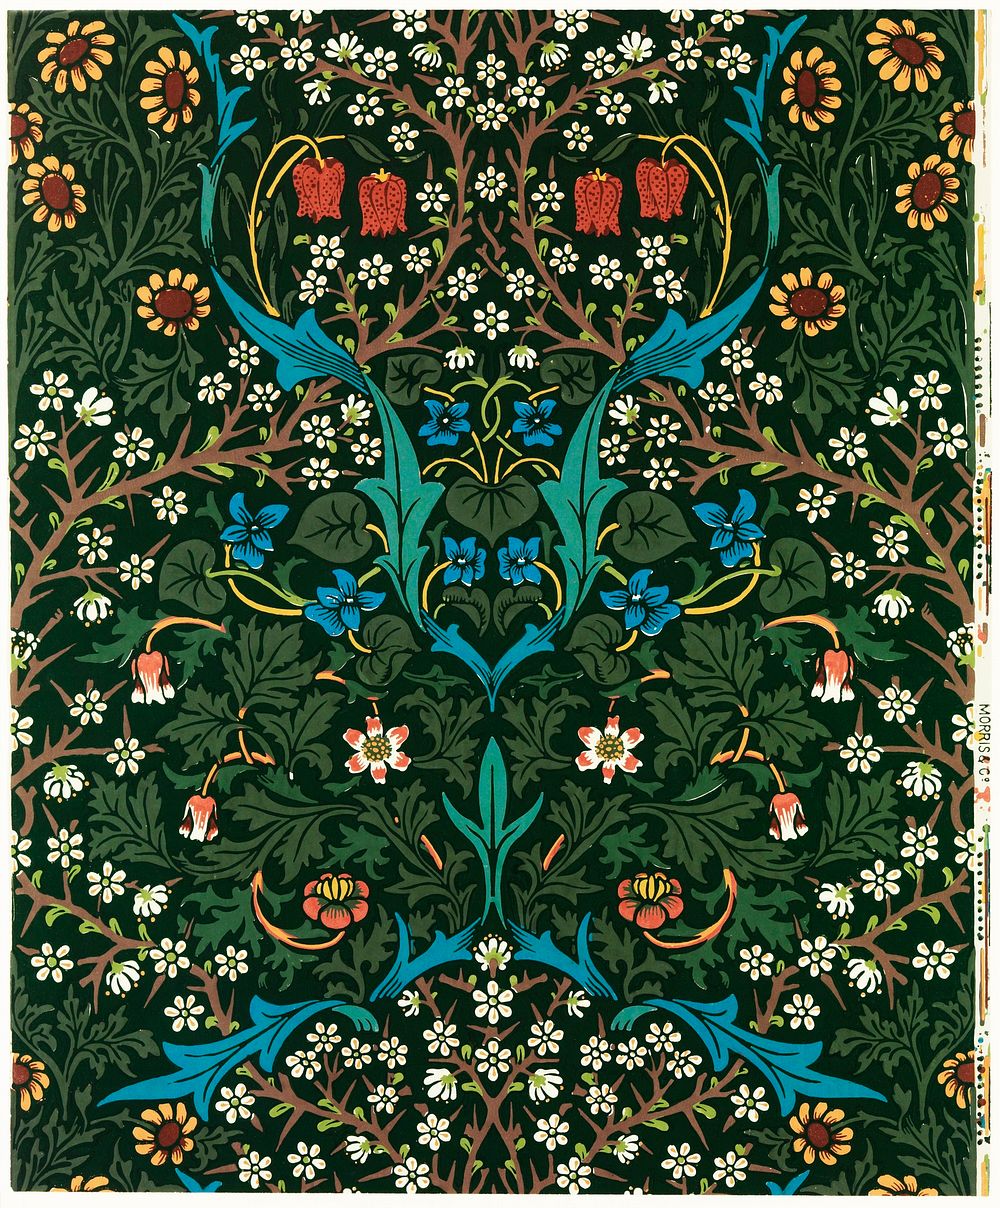 William Morris's (1834-1896) Tulip famous pattern. Original from The MET Museum. Digitally enhanced by rawpixel.